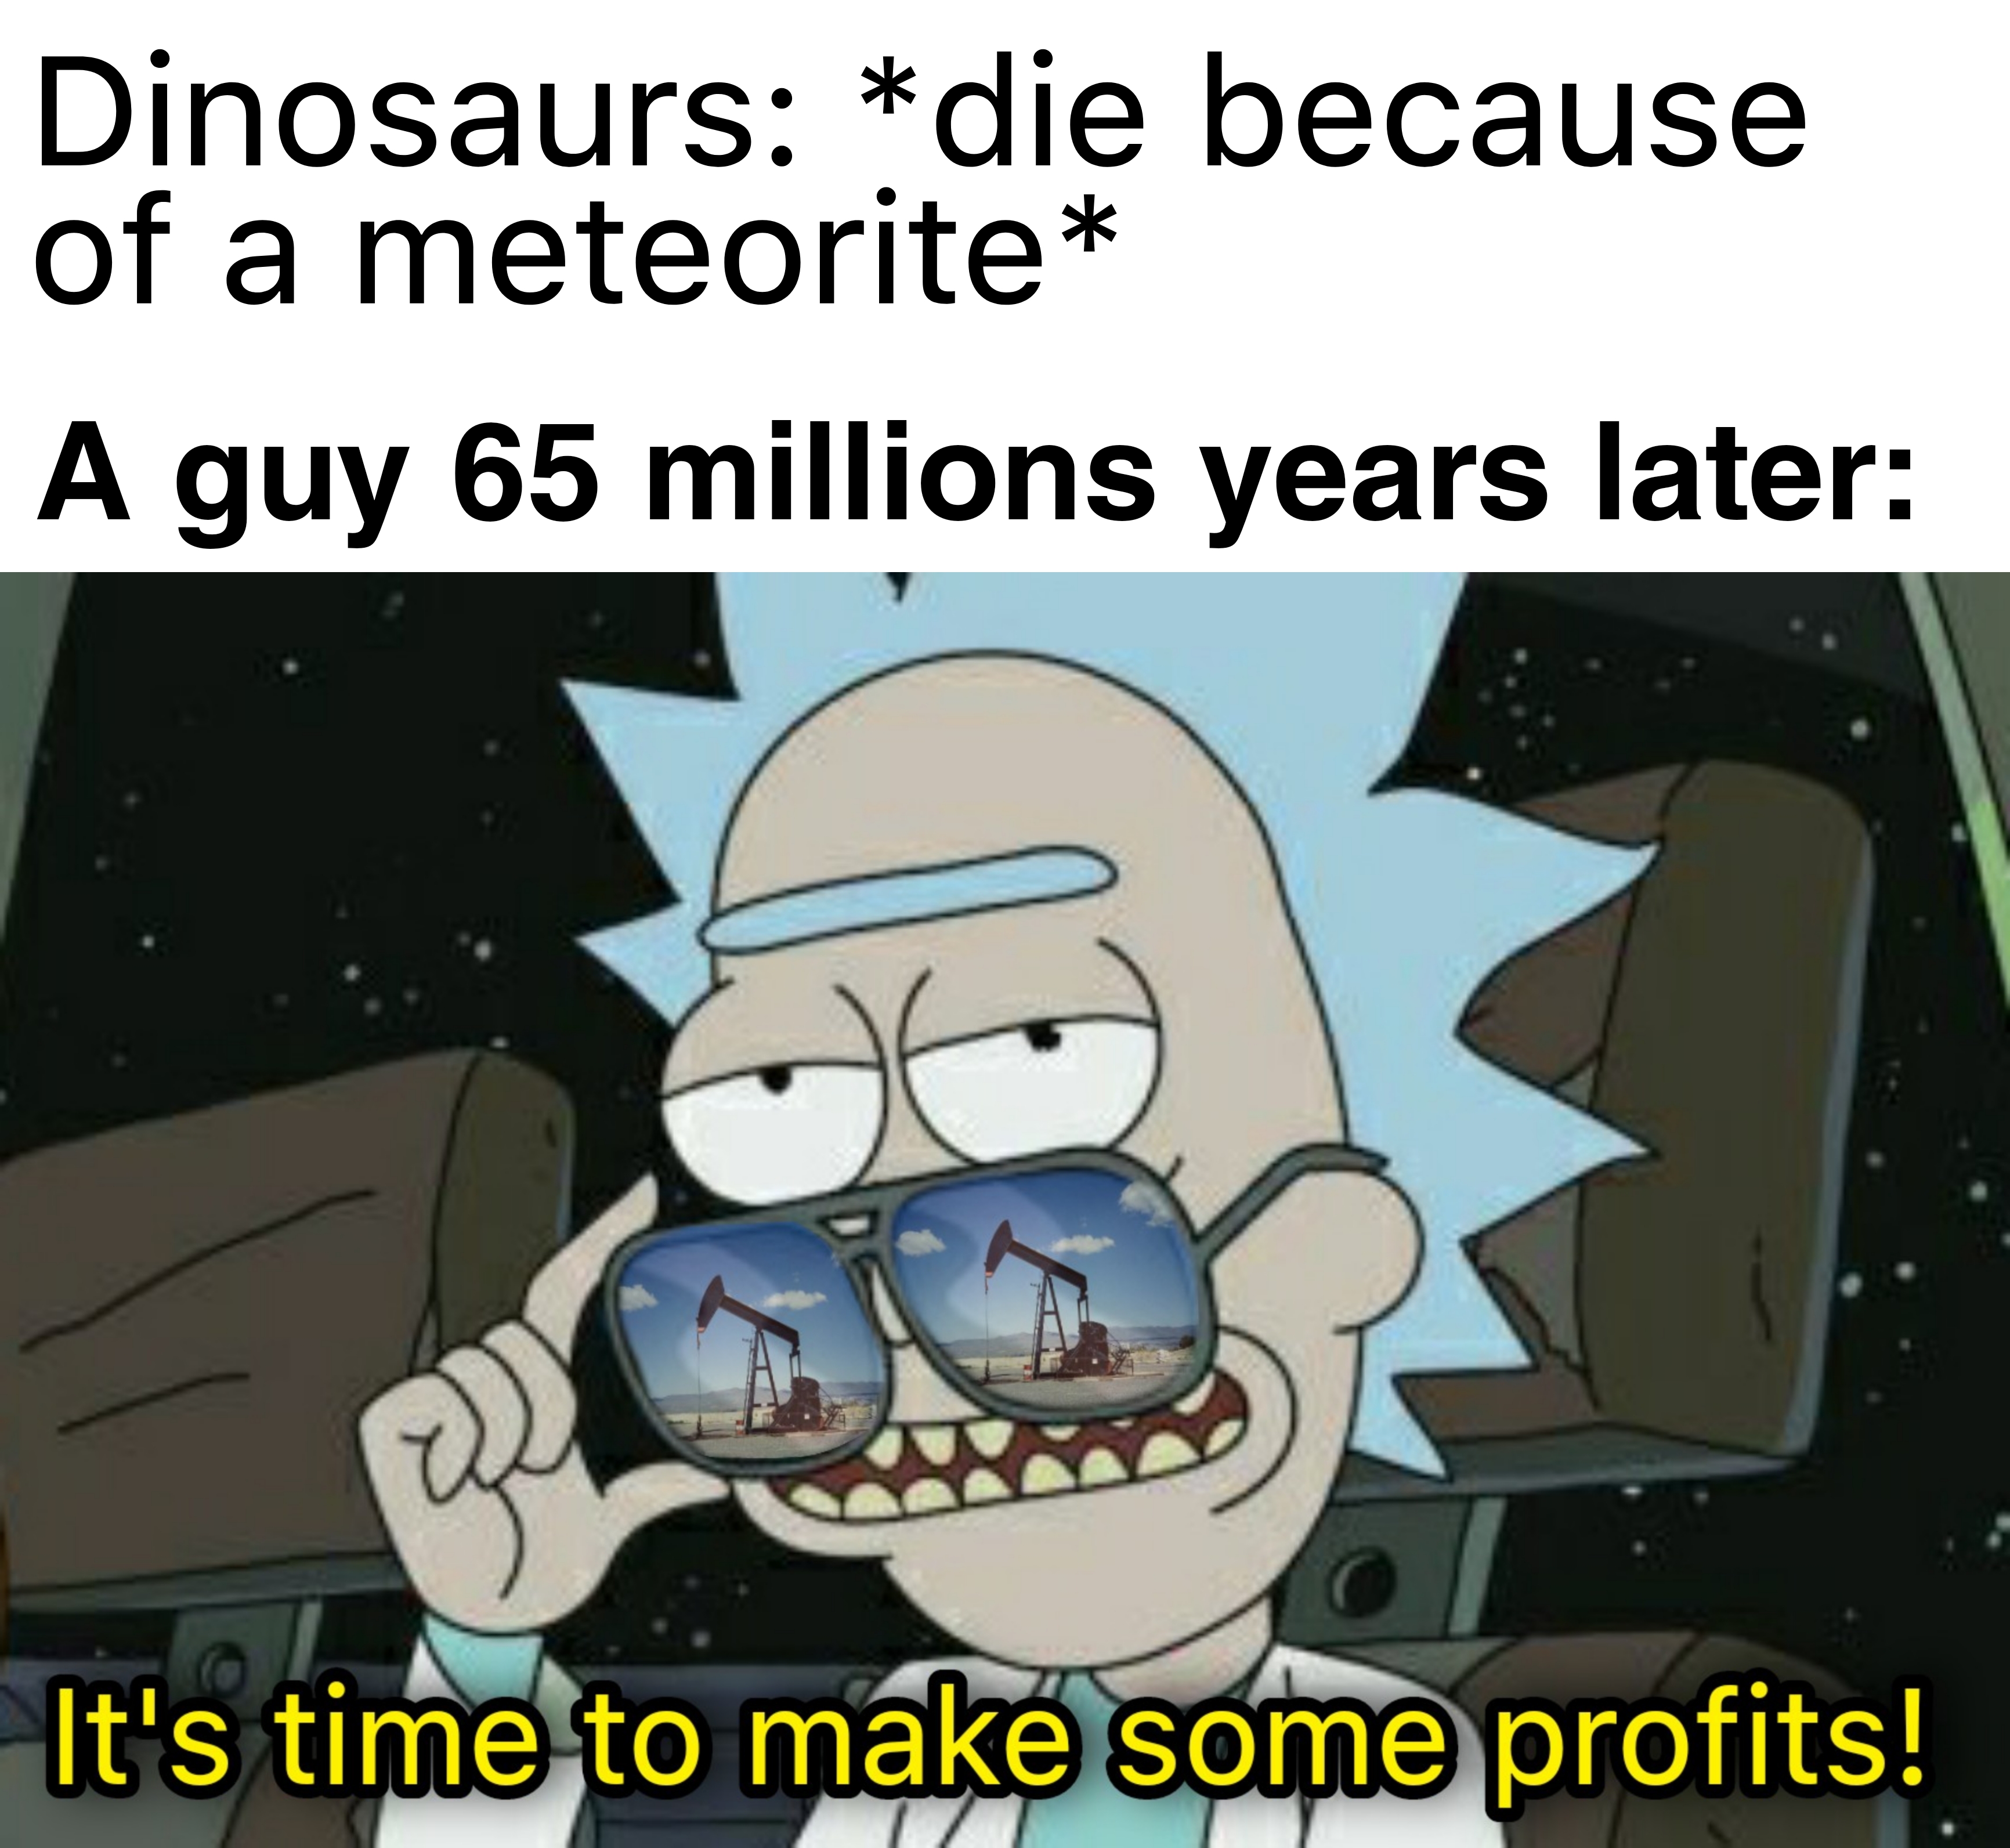 dank memes, funny memes - space jam a new legacy rick and morty - Dinosaurs die because of a meteorite A guy 65 millions years later Be It's time to make some profits!